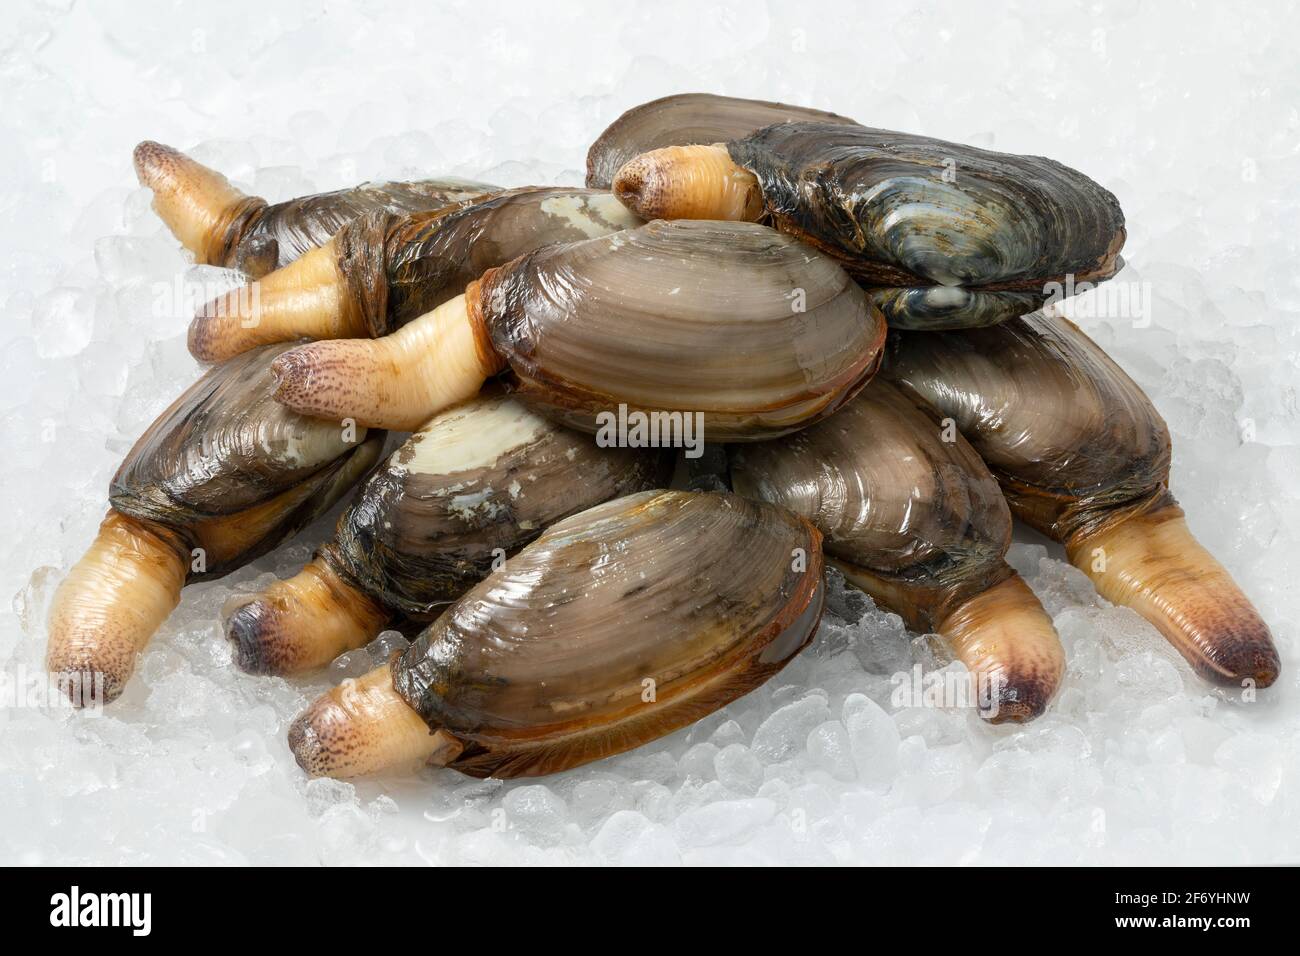 Heap of fresh raw alive soft shell clams, an edible saltwater clam, on ice Stock Photo